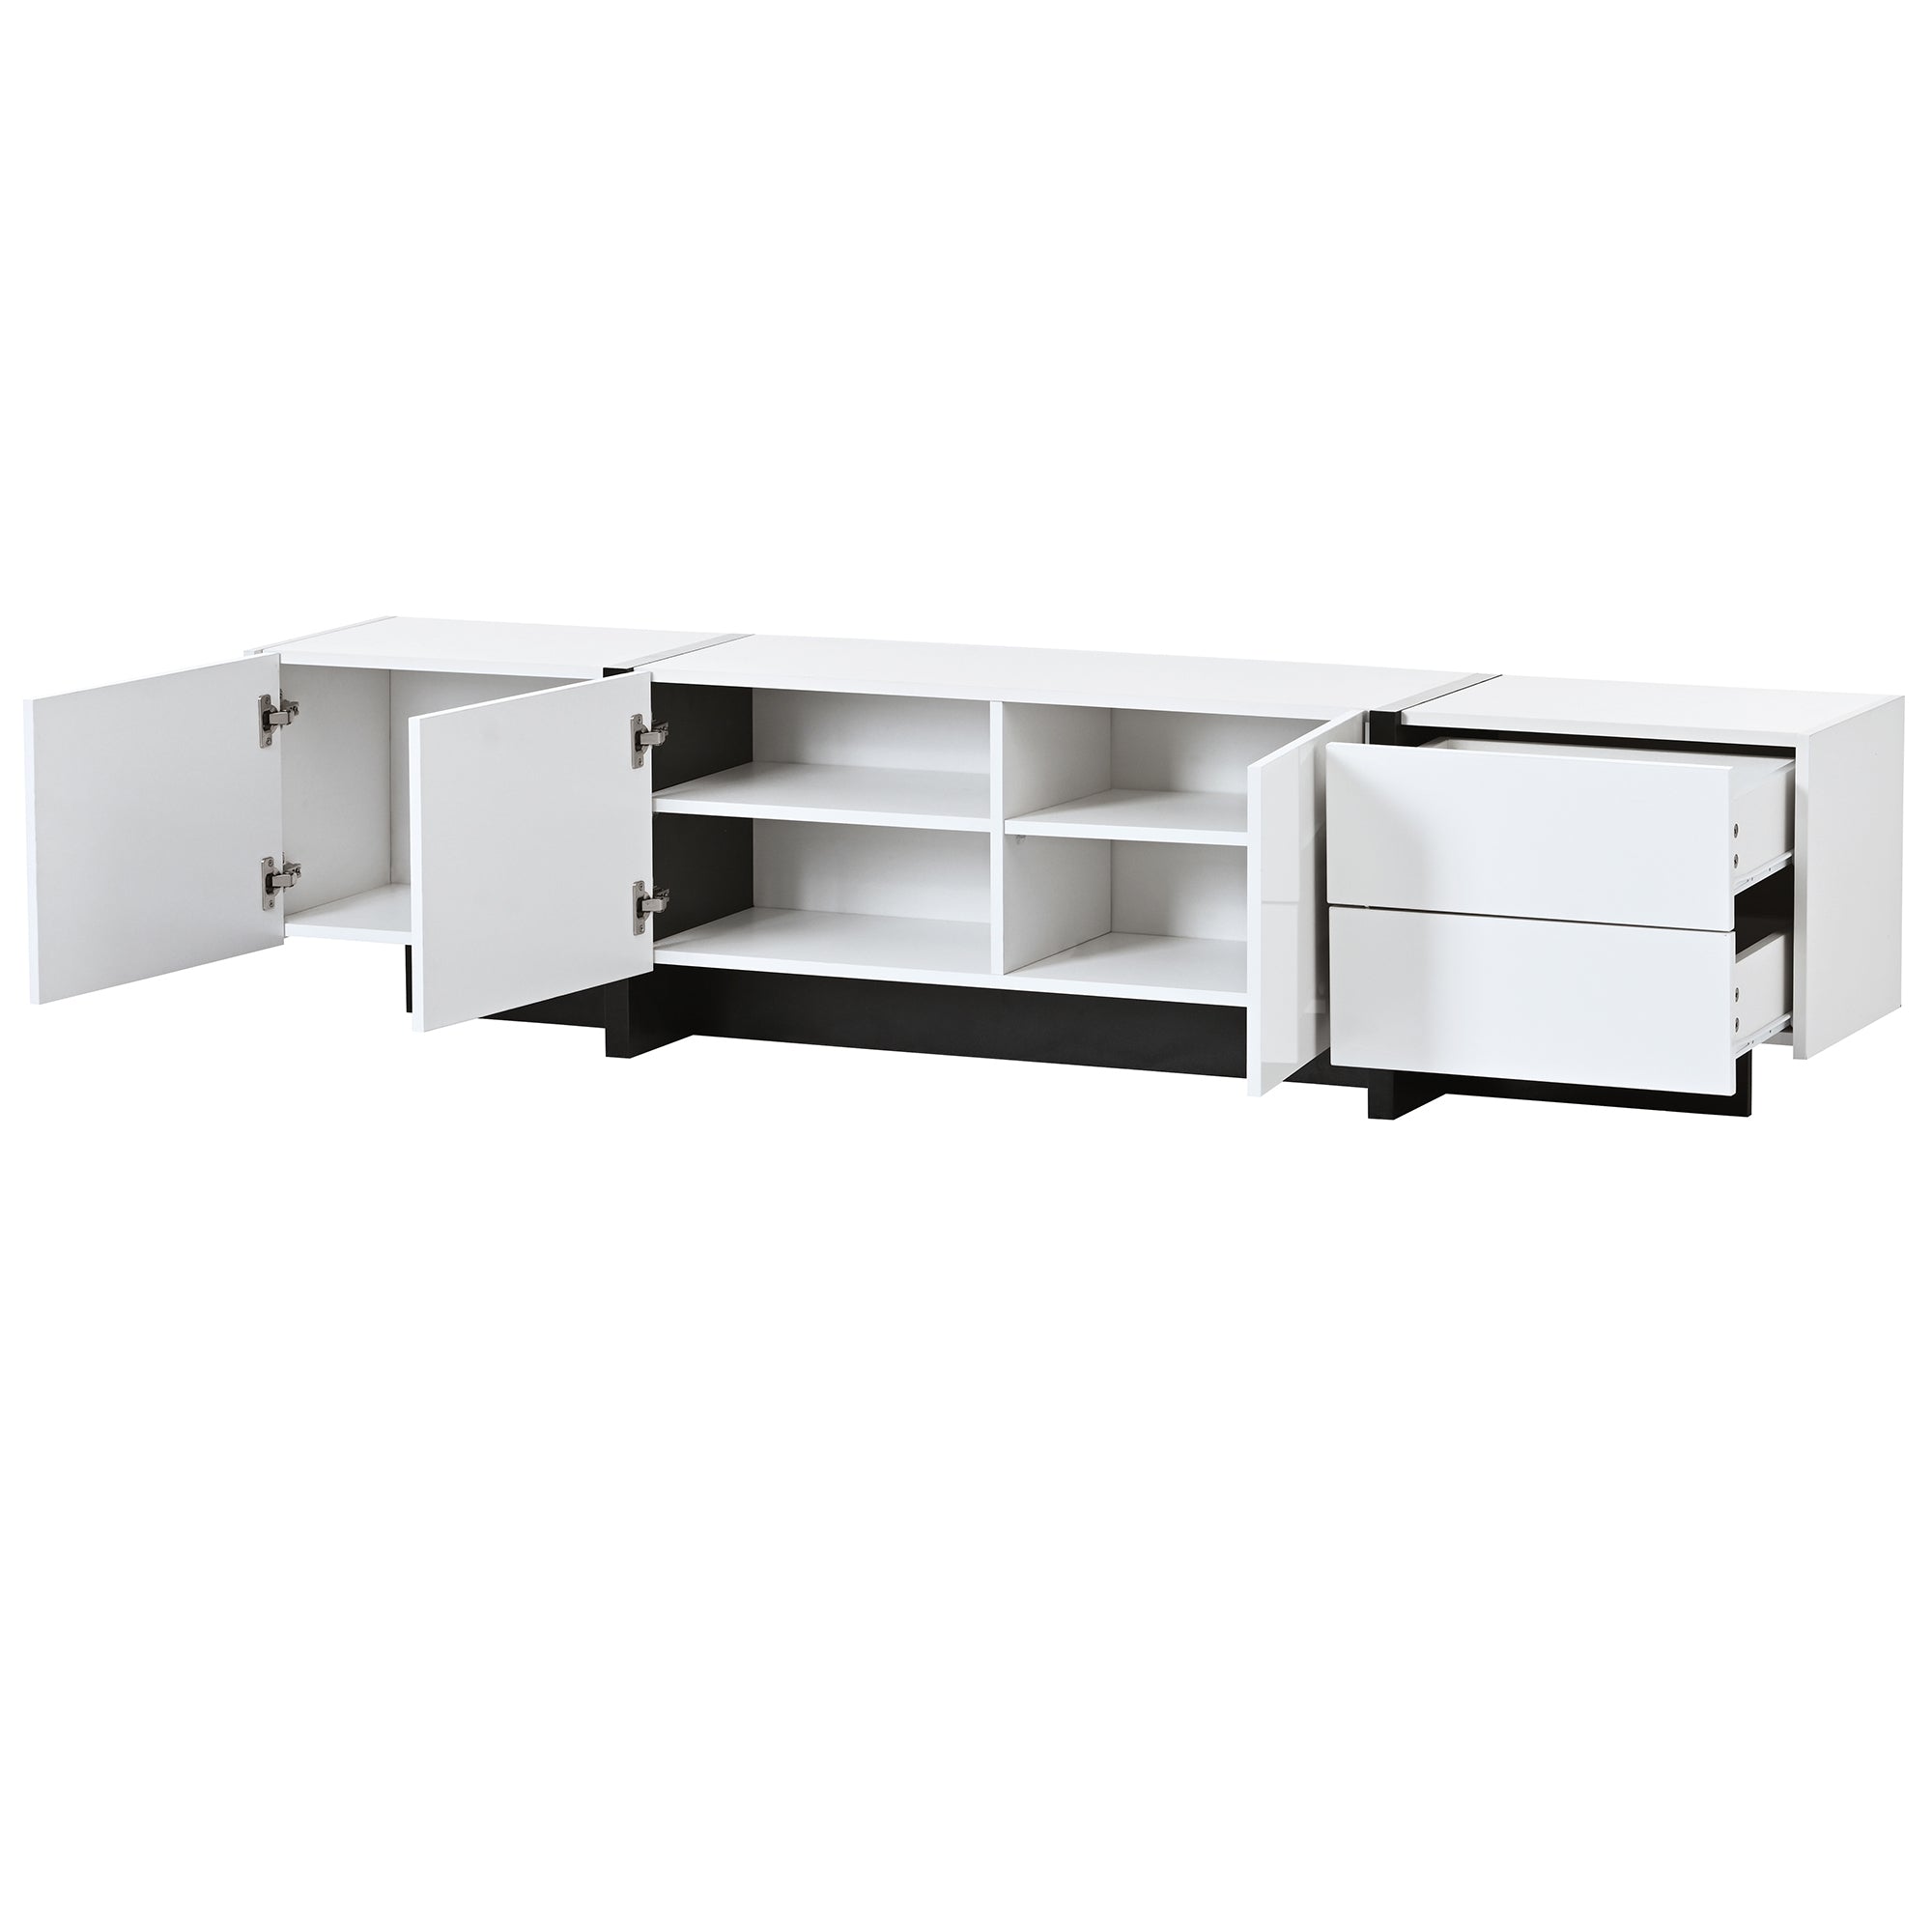 74.8" Modern High Glossy White & Black TV Stand for TV up to 86"